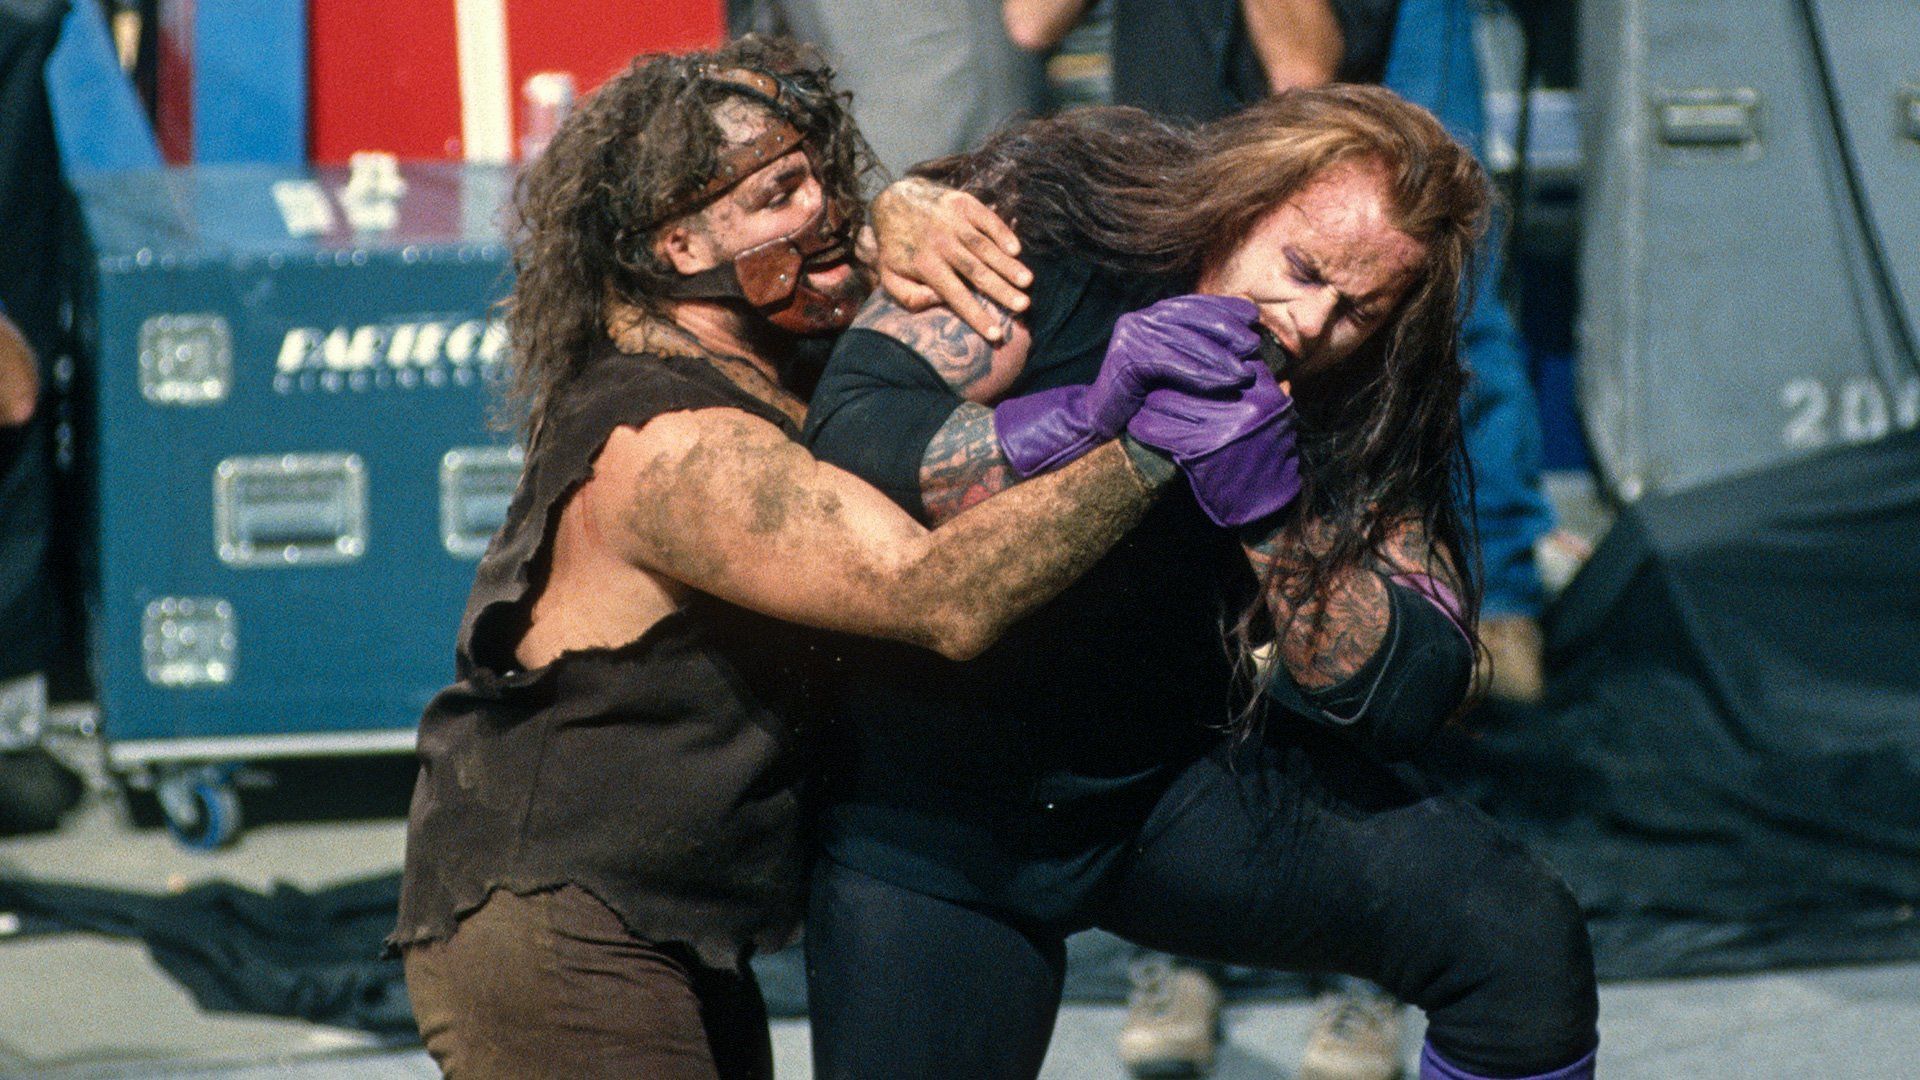 Mankind and The Undertaker